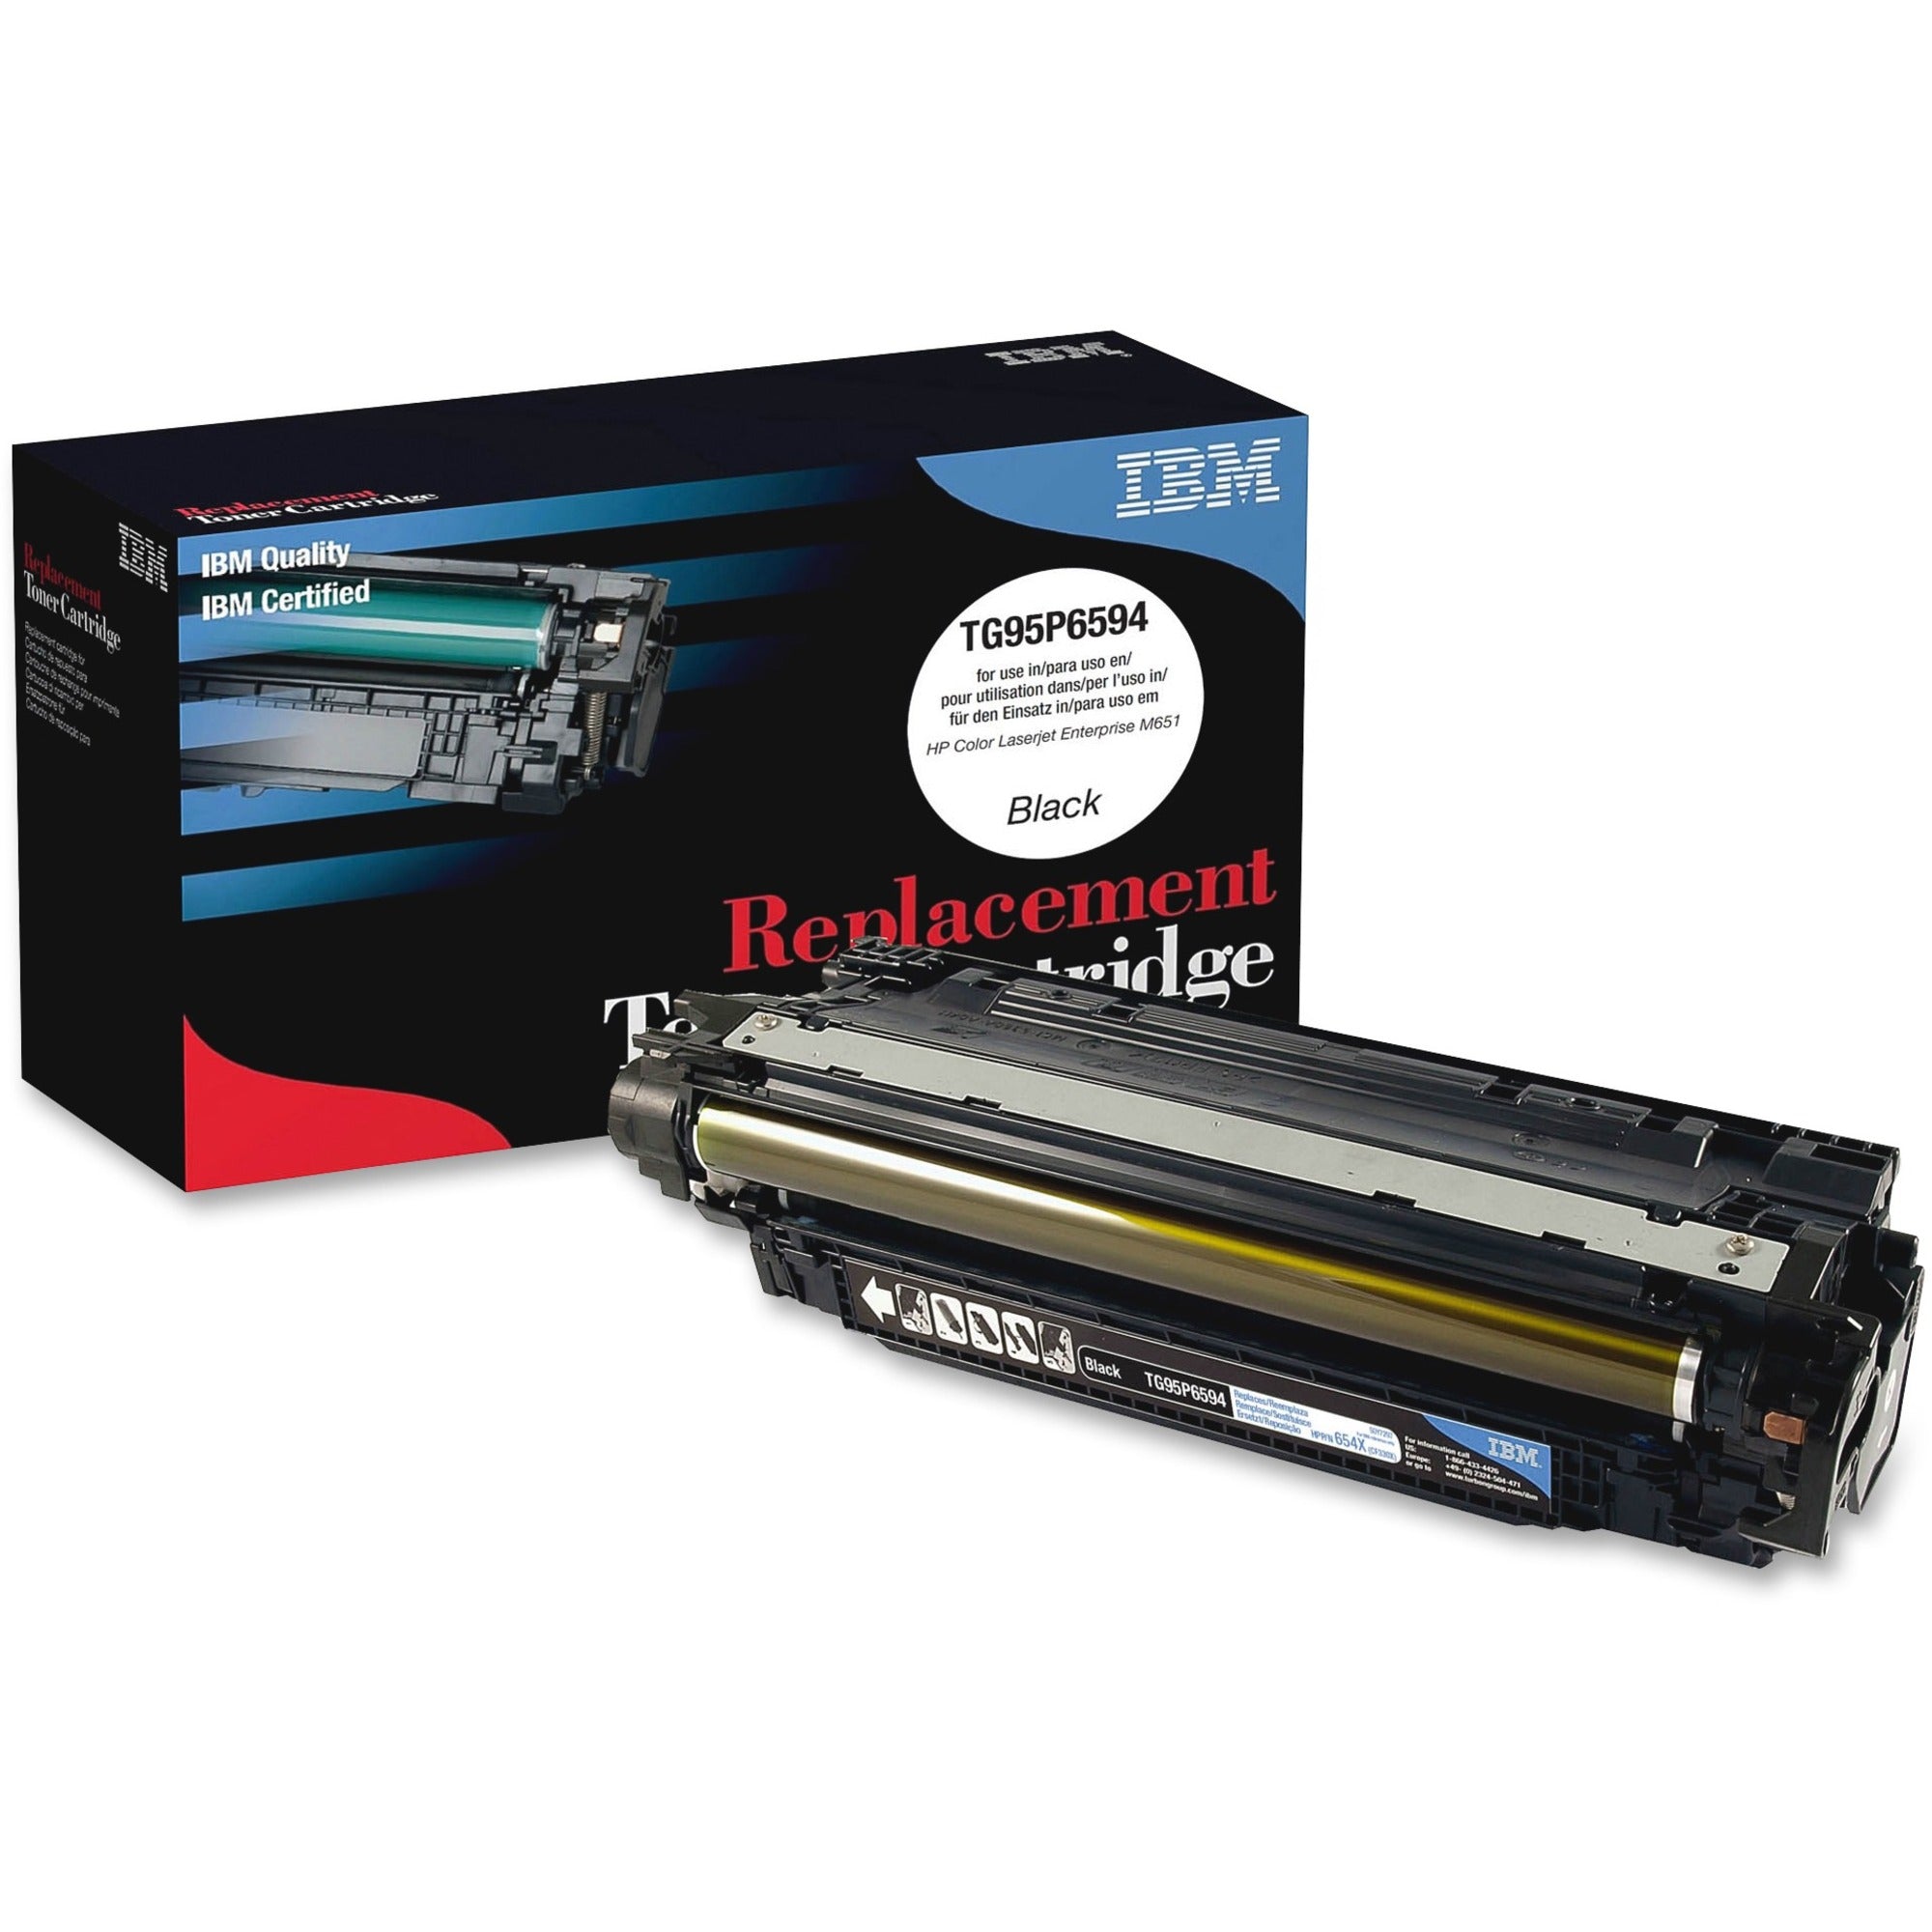 IBM Remanufactured High Yield Laser Toner Cartridge - Alternative for HP 654X (CF330X) - Black - 1 Each - 20500 Pages - 